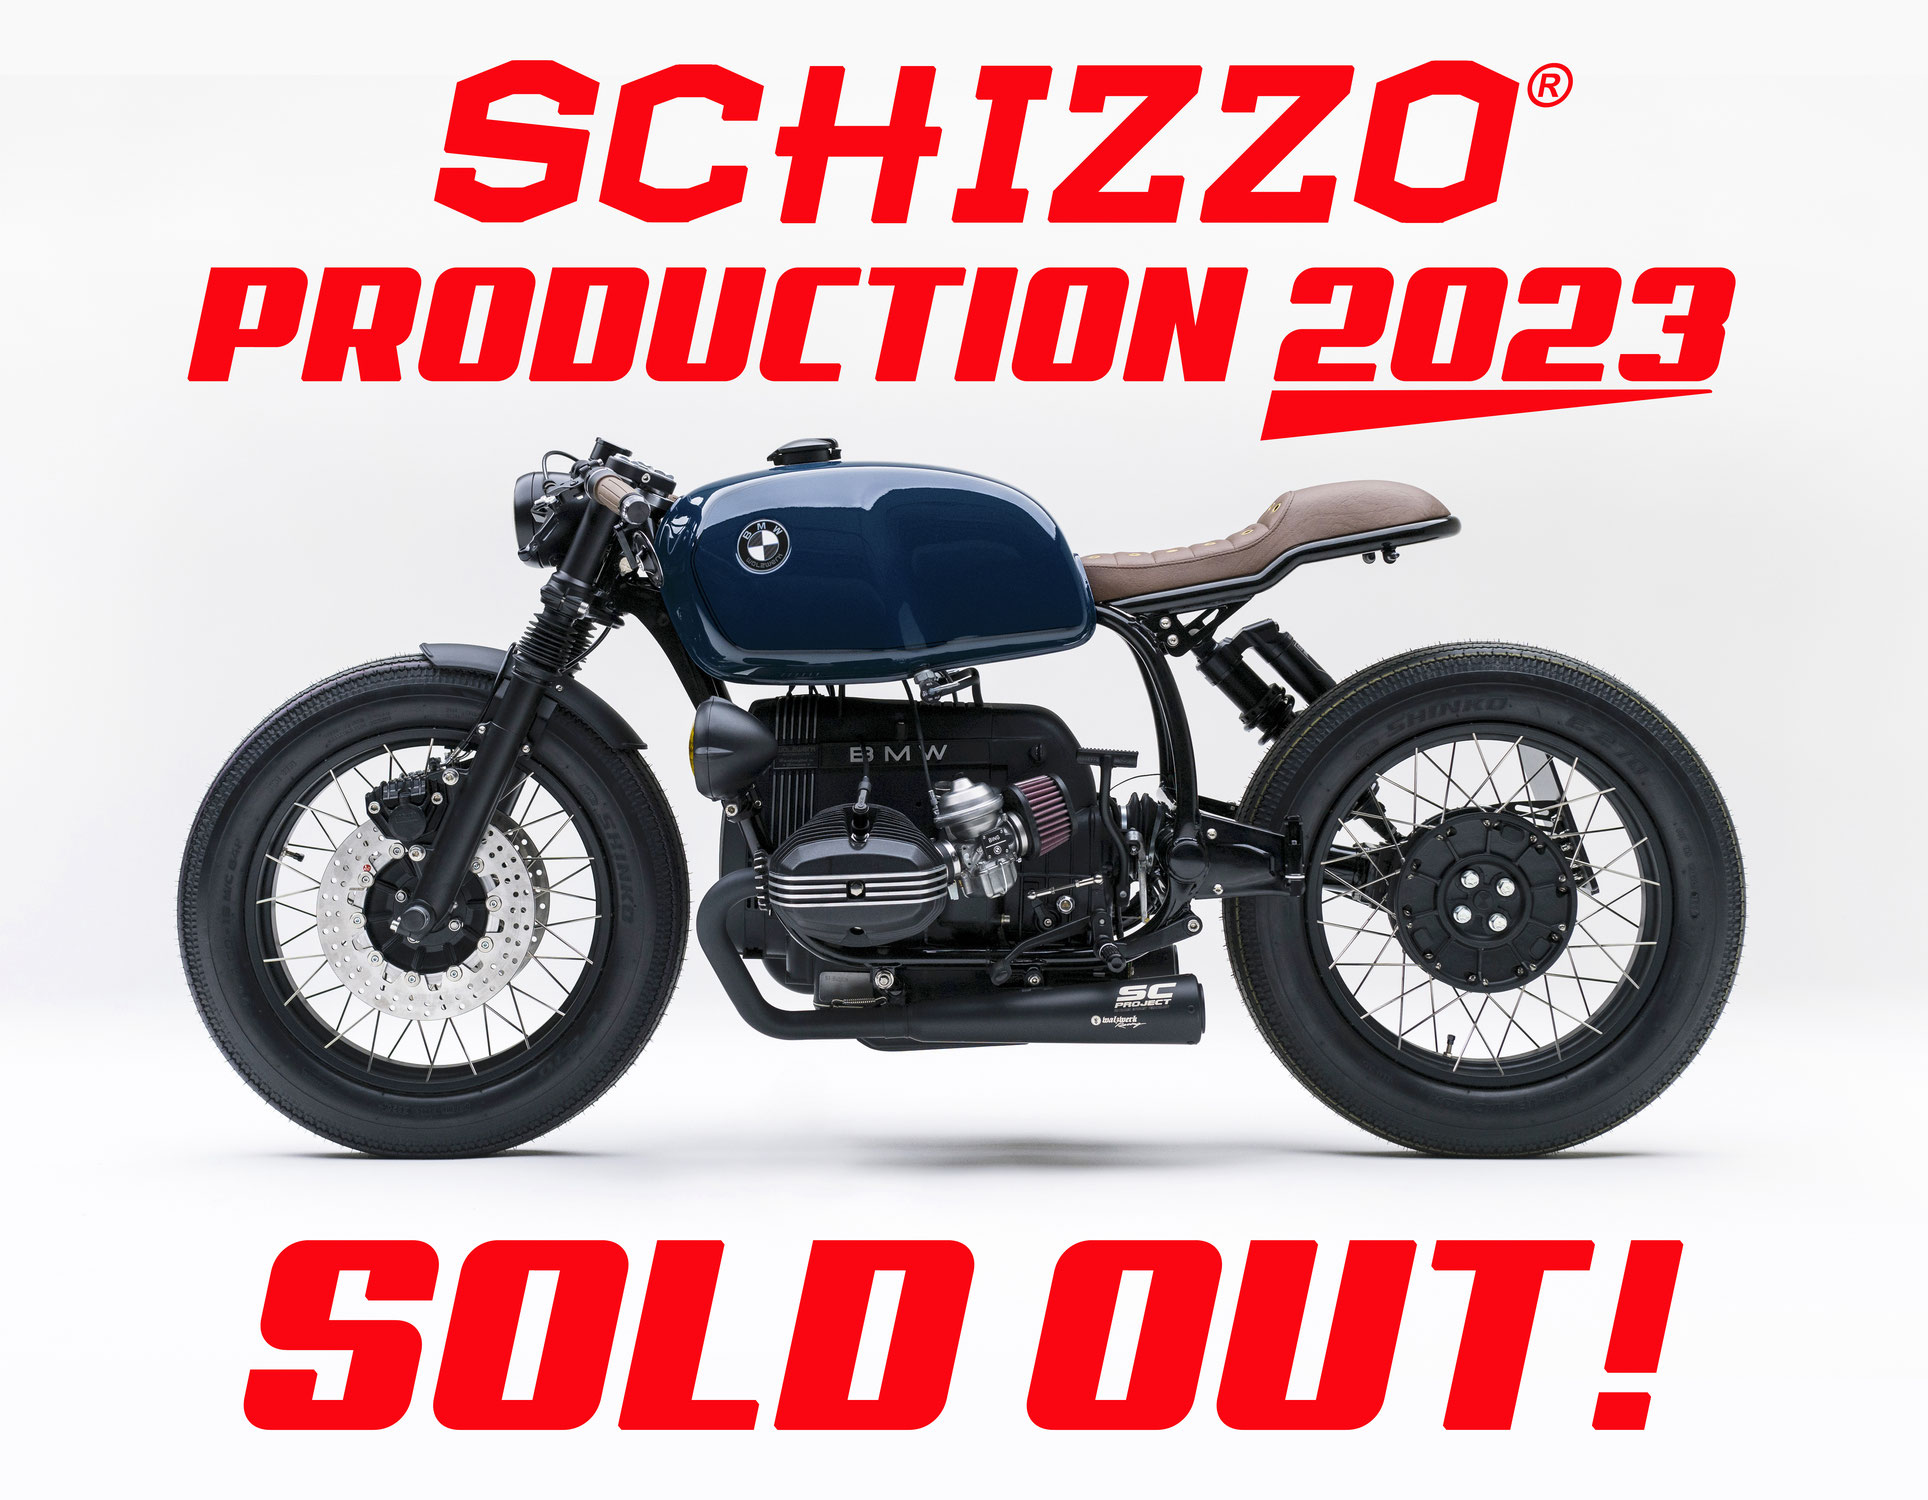 2023 SCHIZZO® Production totally SOLD OUT!